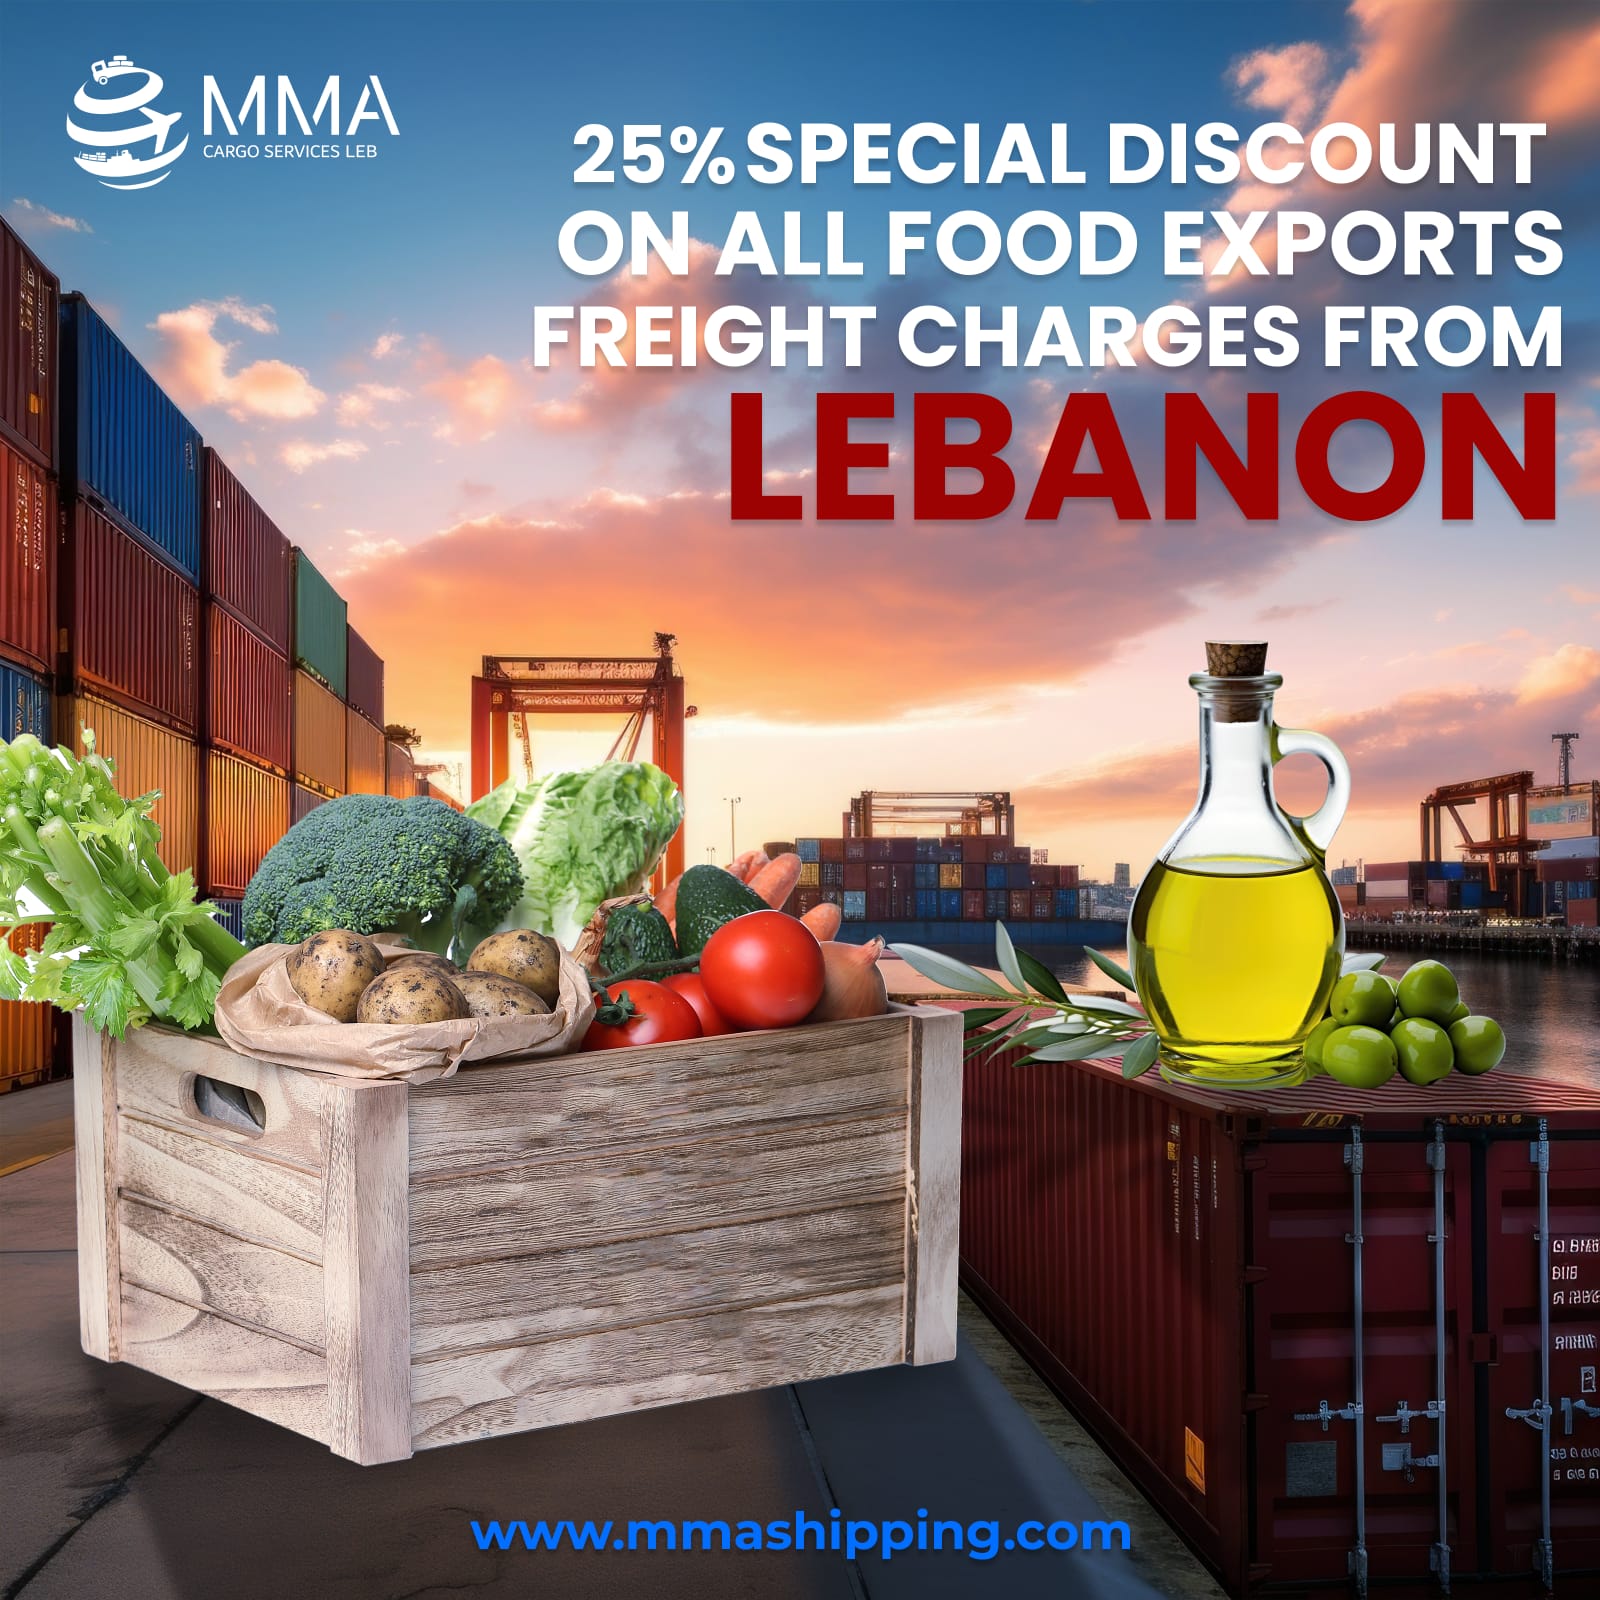 Dubai shipping charges by MMA Shipping